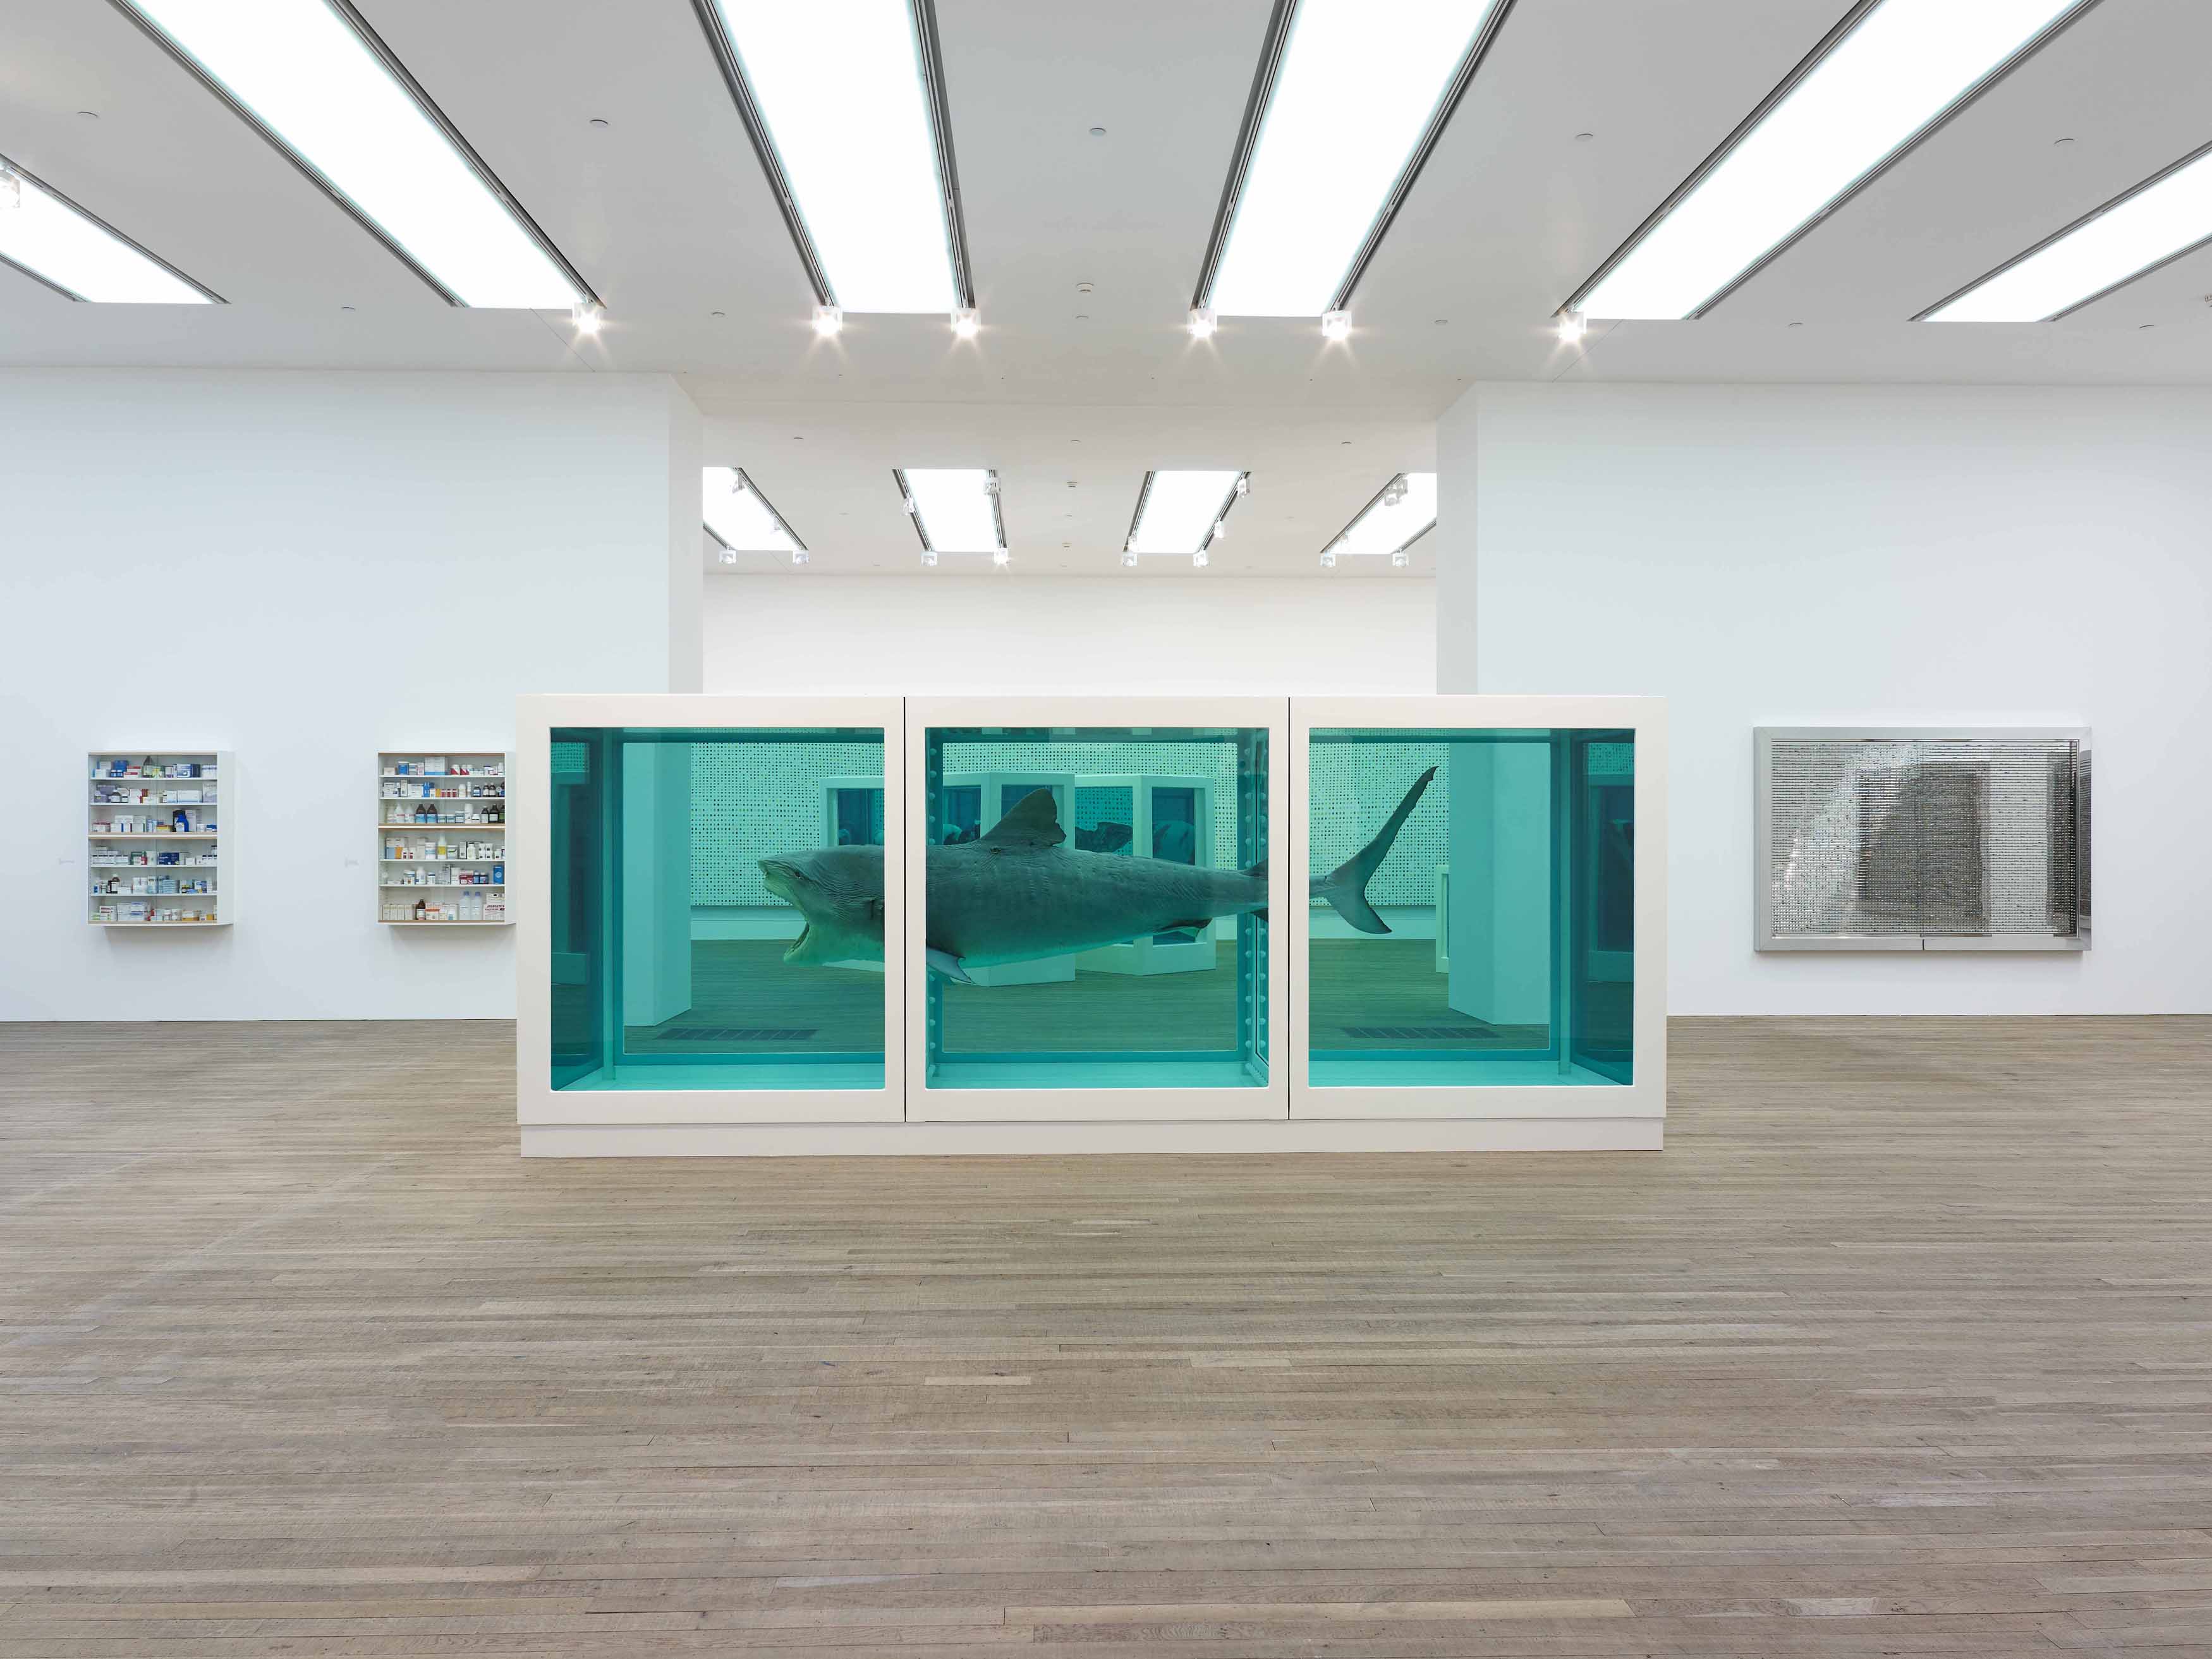 Damien Hirst – The Physical Impossibility of Death in the Mind of Someone Living – 1991